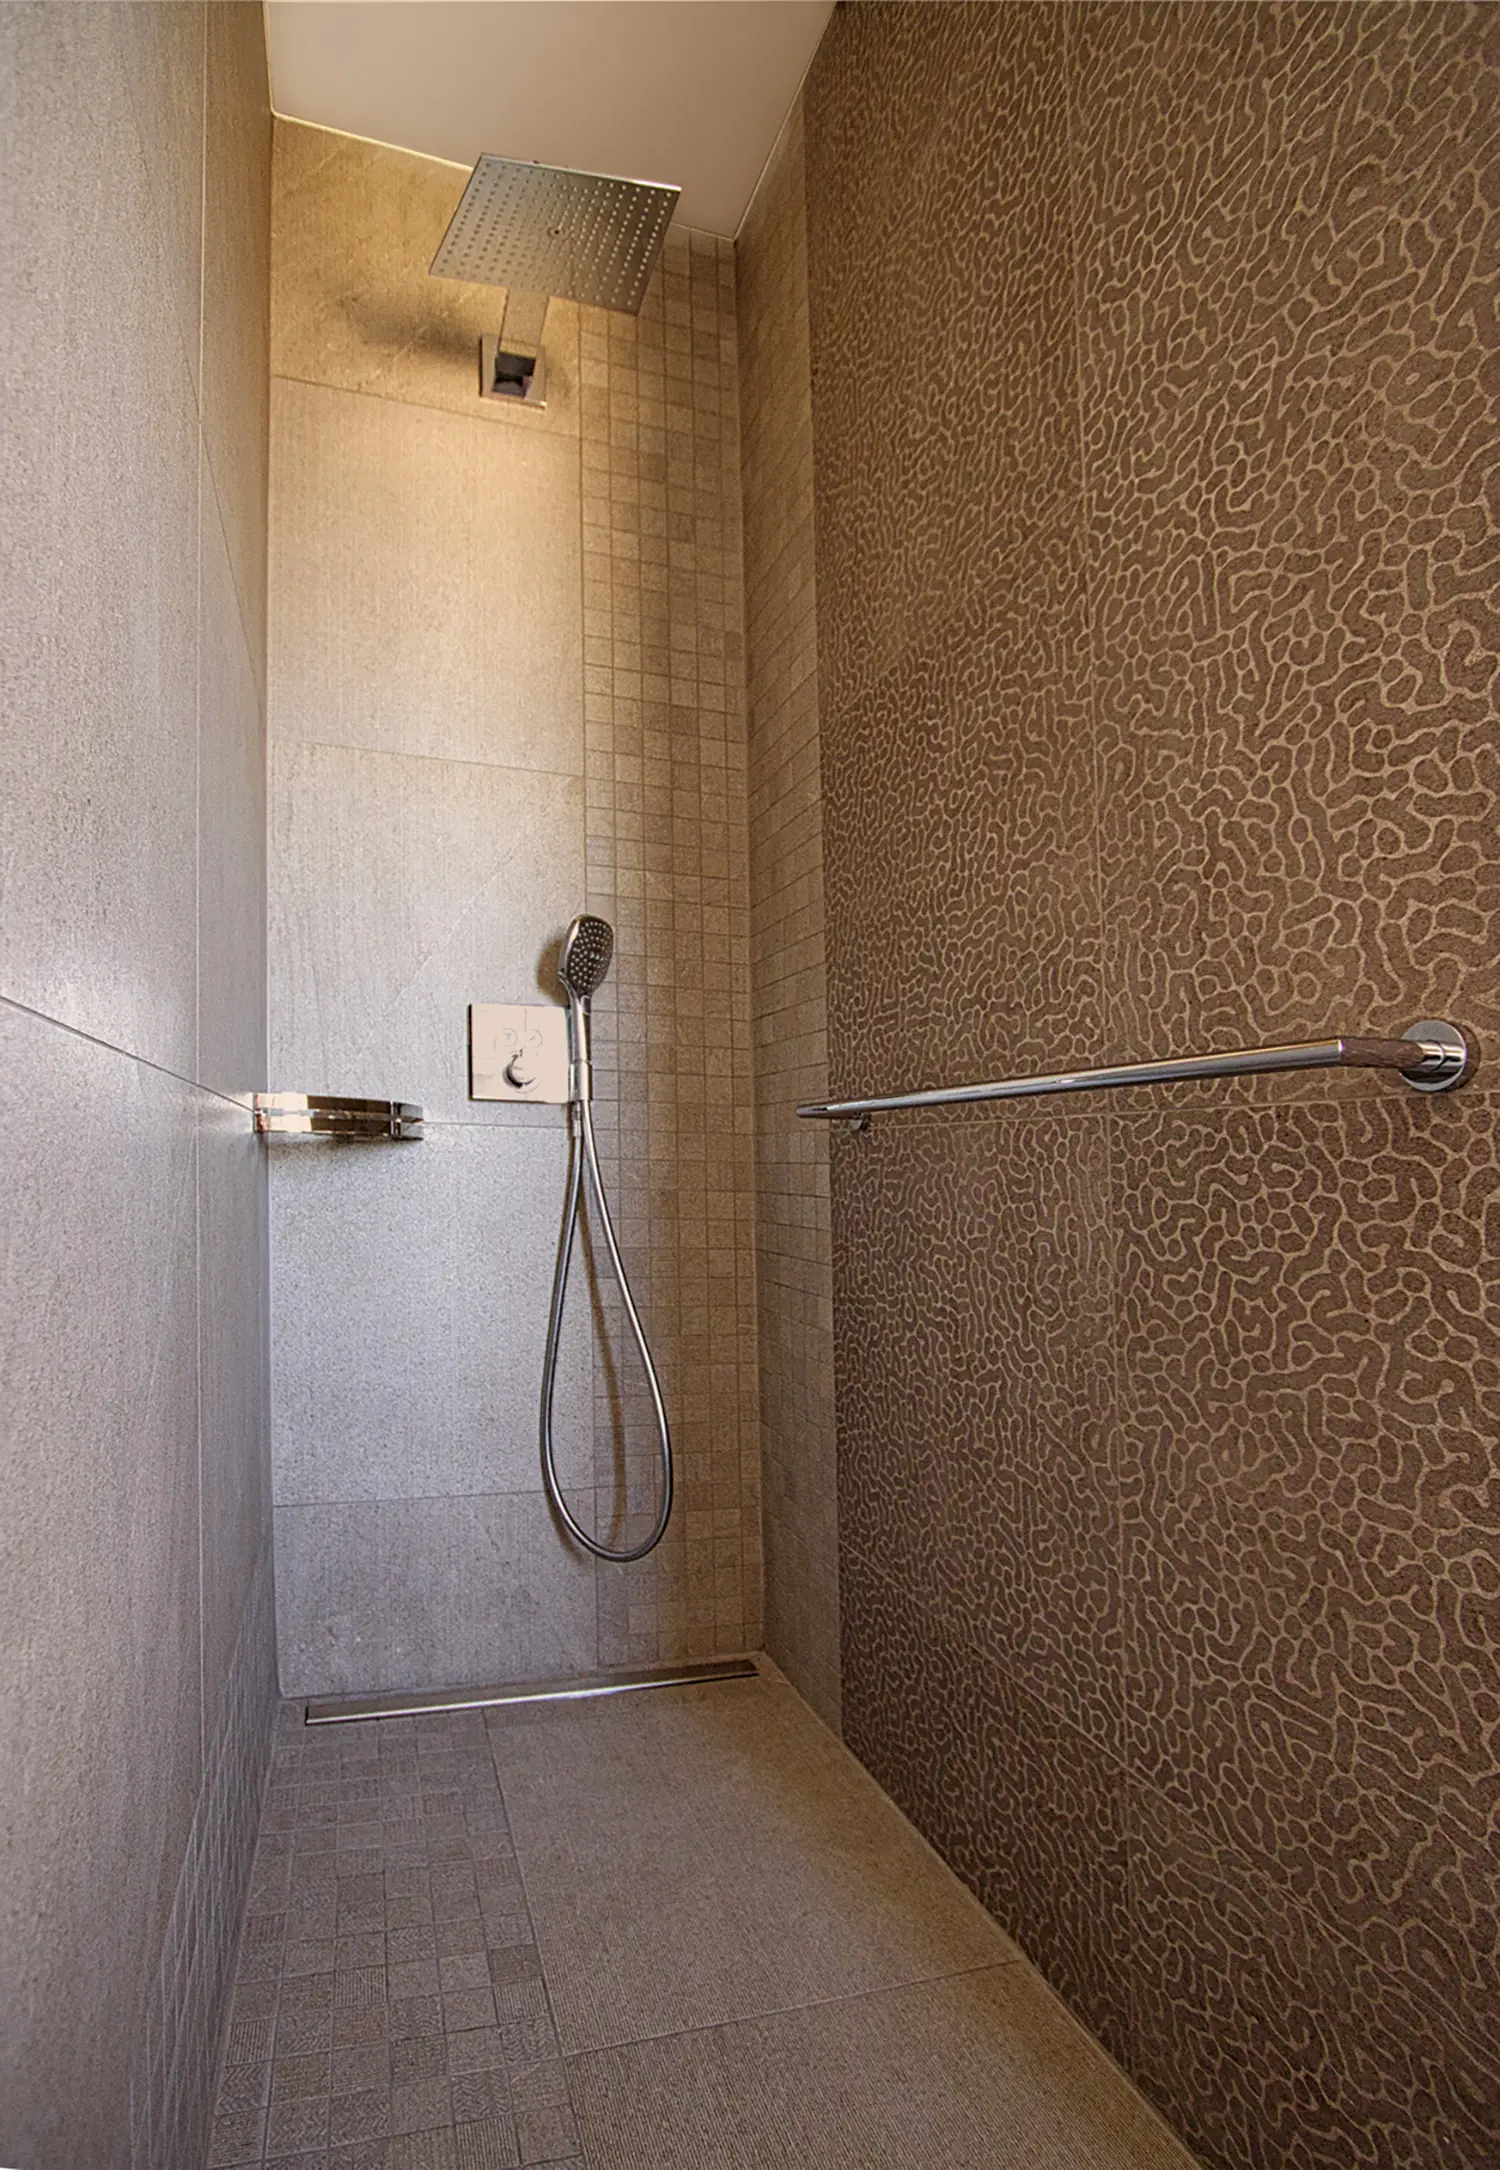 Photo of the shower with details of the layout of the tiles in grey tones; renovation project by Elles Interior Design.